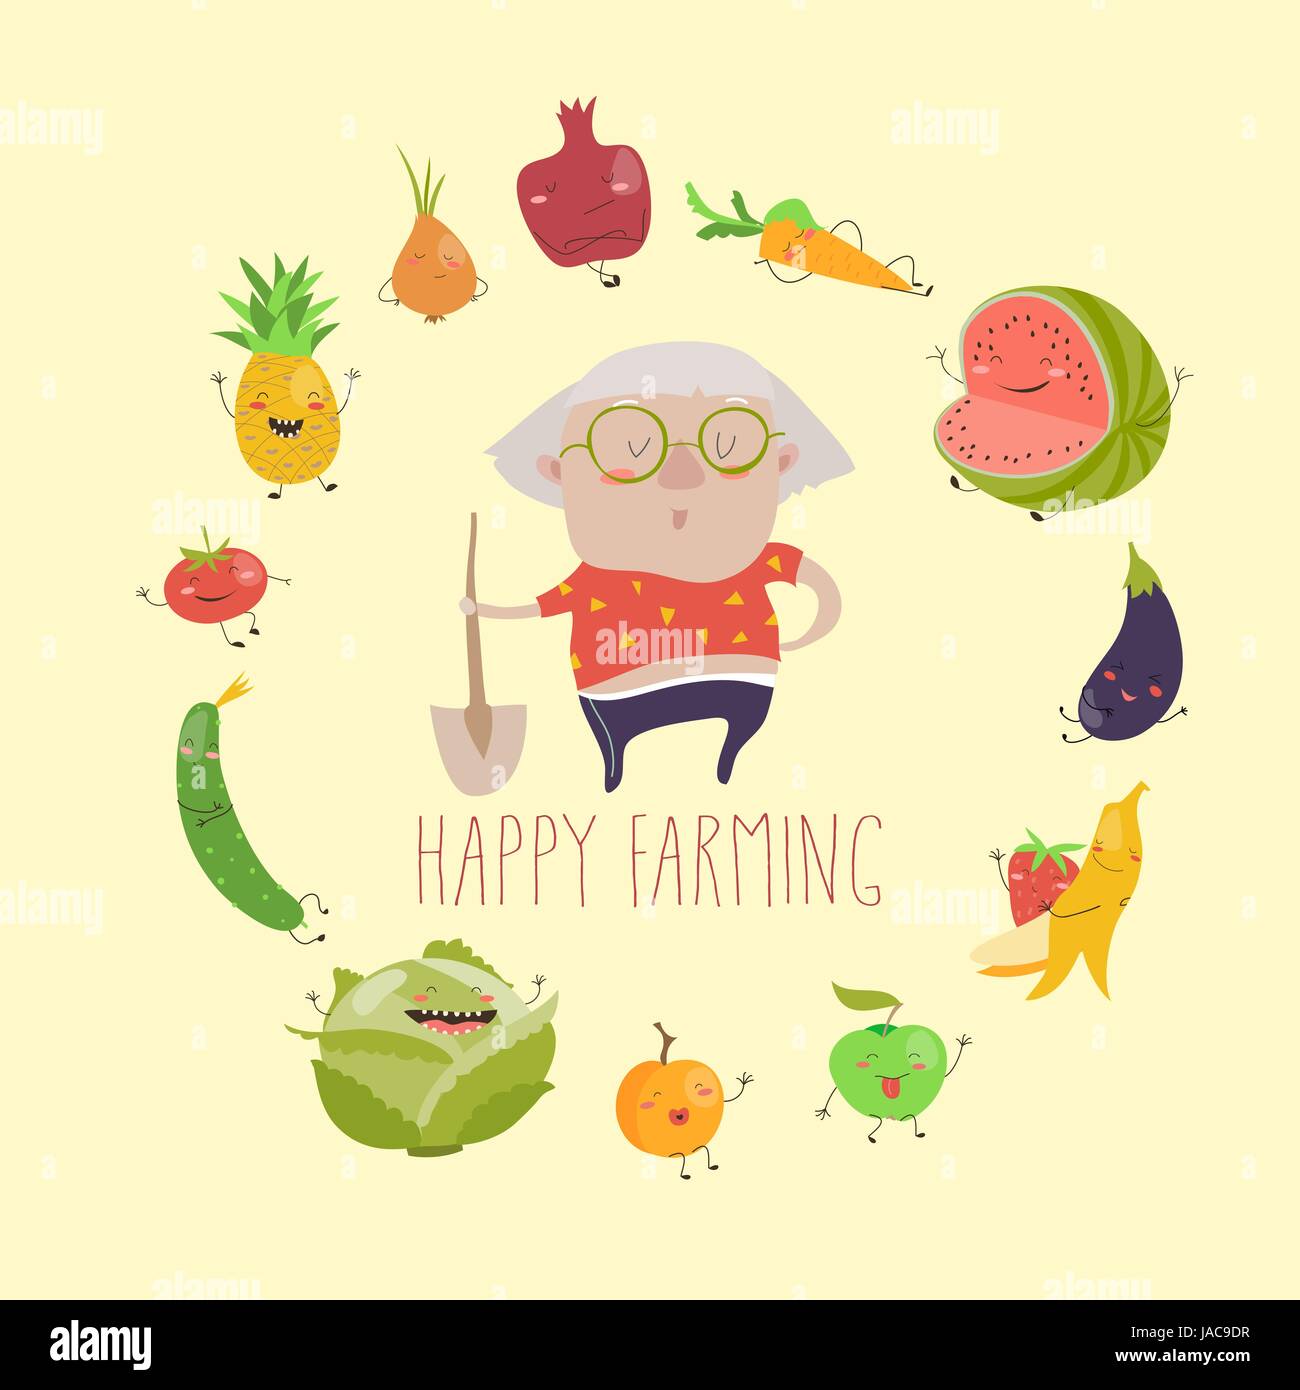 Cute granny farmer with funny vegetables Stock Vector